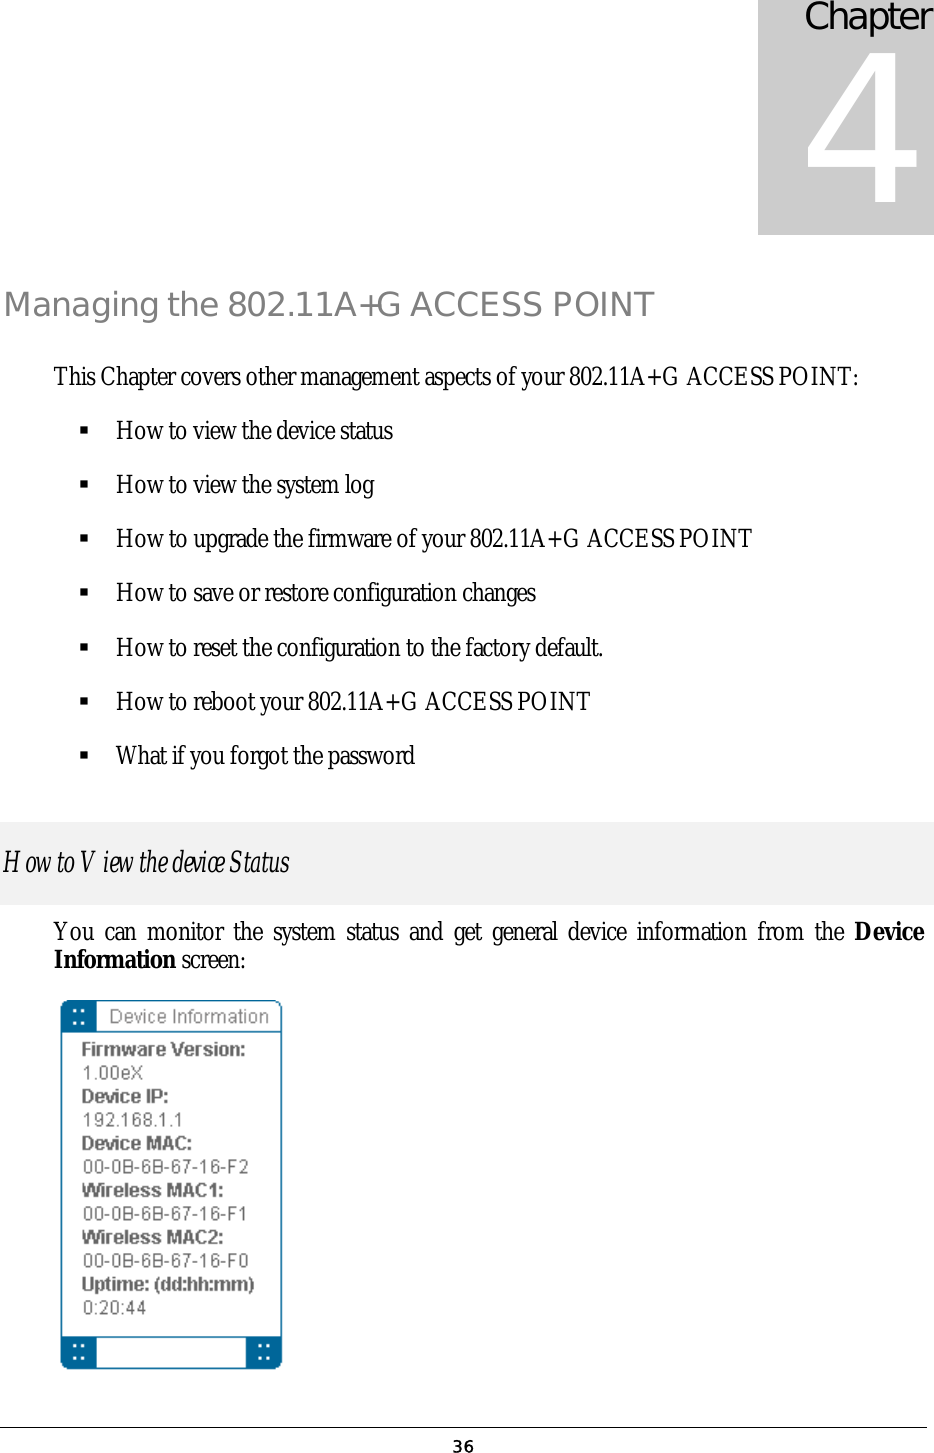 Chapter 4 Managing the 802.11A+G ACCESS POINT This Chapter covers other management aspects of your 802.11A+G ACCESS POINT:  How to view the device status  How to view the system log  How to upgrade the firmware of your 802.11A+G ACCESS POINT  How to save or restore configuration changes  How to reset the configuration to the factory default.  How to reboot your 802.11A+G ACCESS POINT  What if you forgot the password How to View the device Status You can monitor the system status and get general device information from the Device Information screen:   36